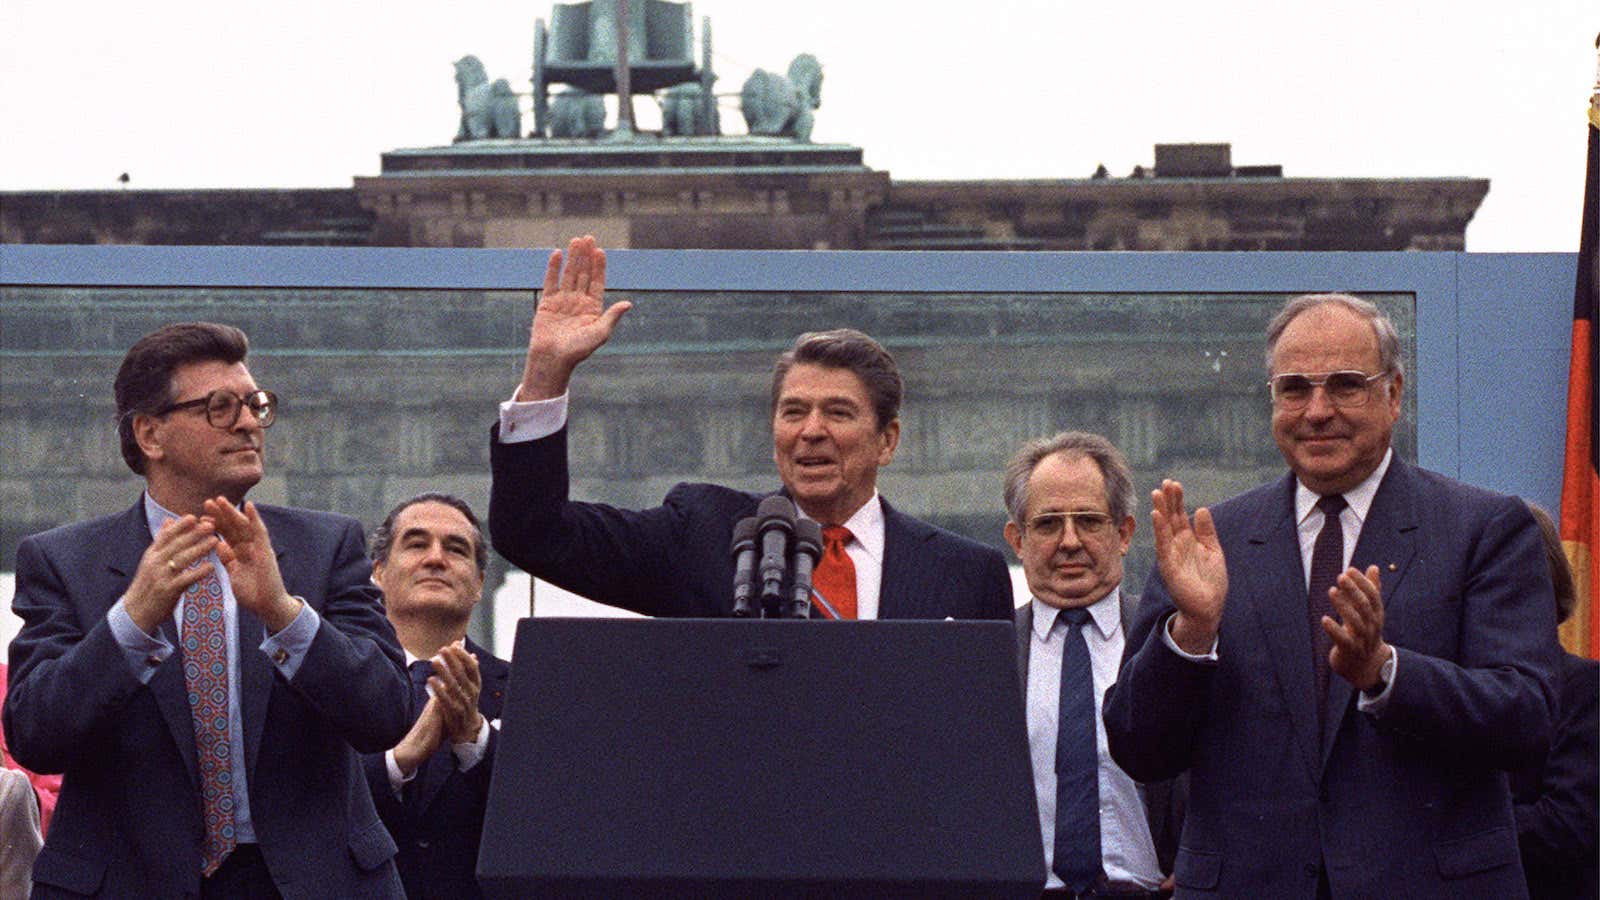 US president Ronald Reagan at the the Brandenburg Gate of the Berlin Wall in 1987.